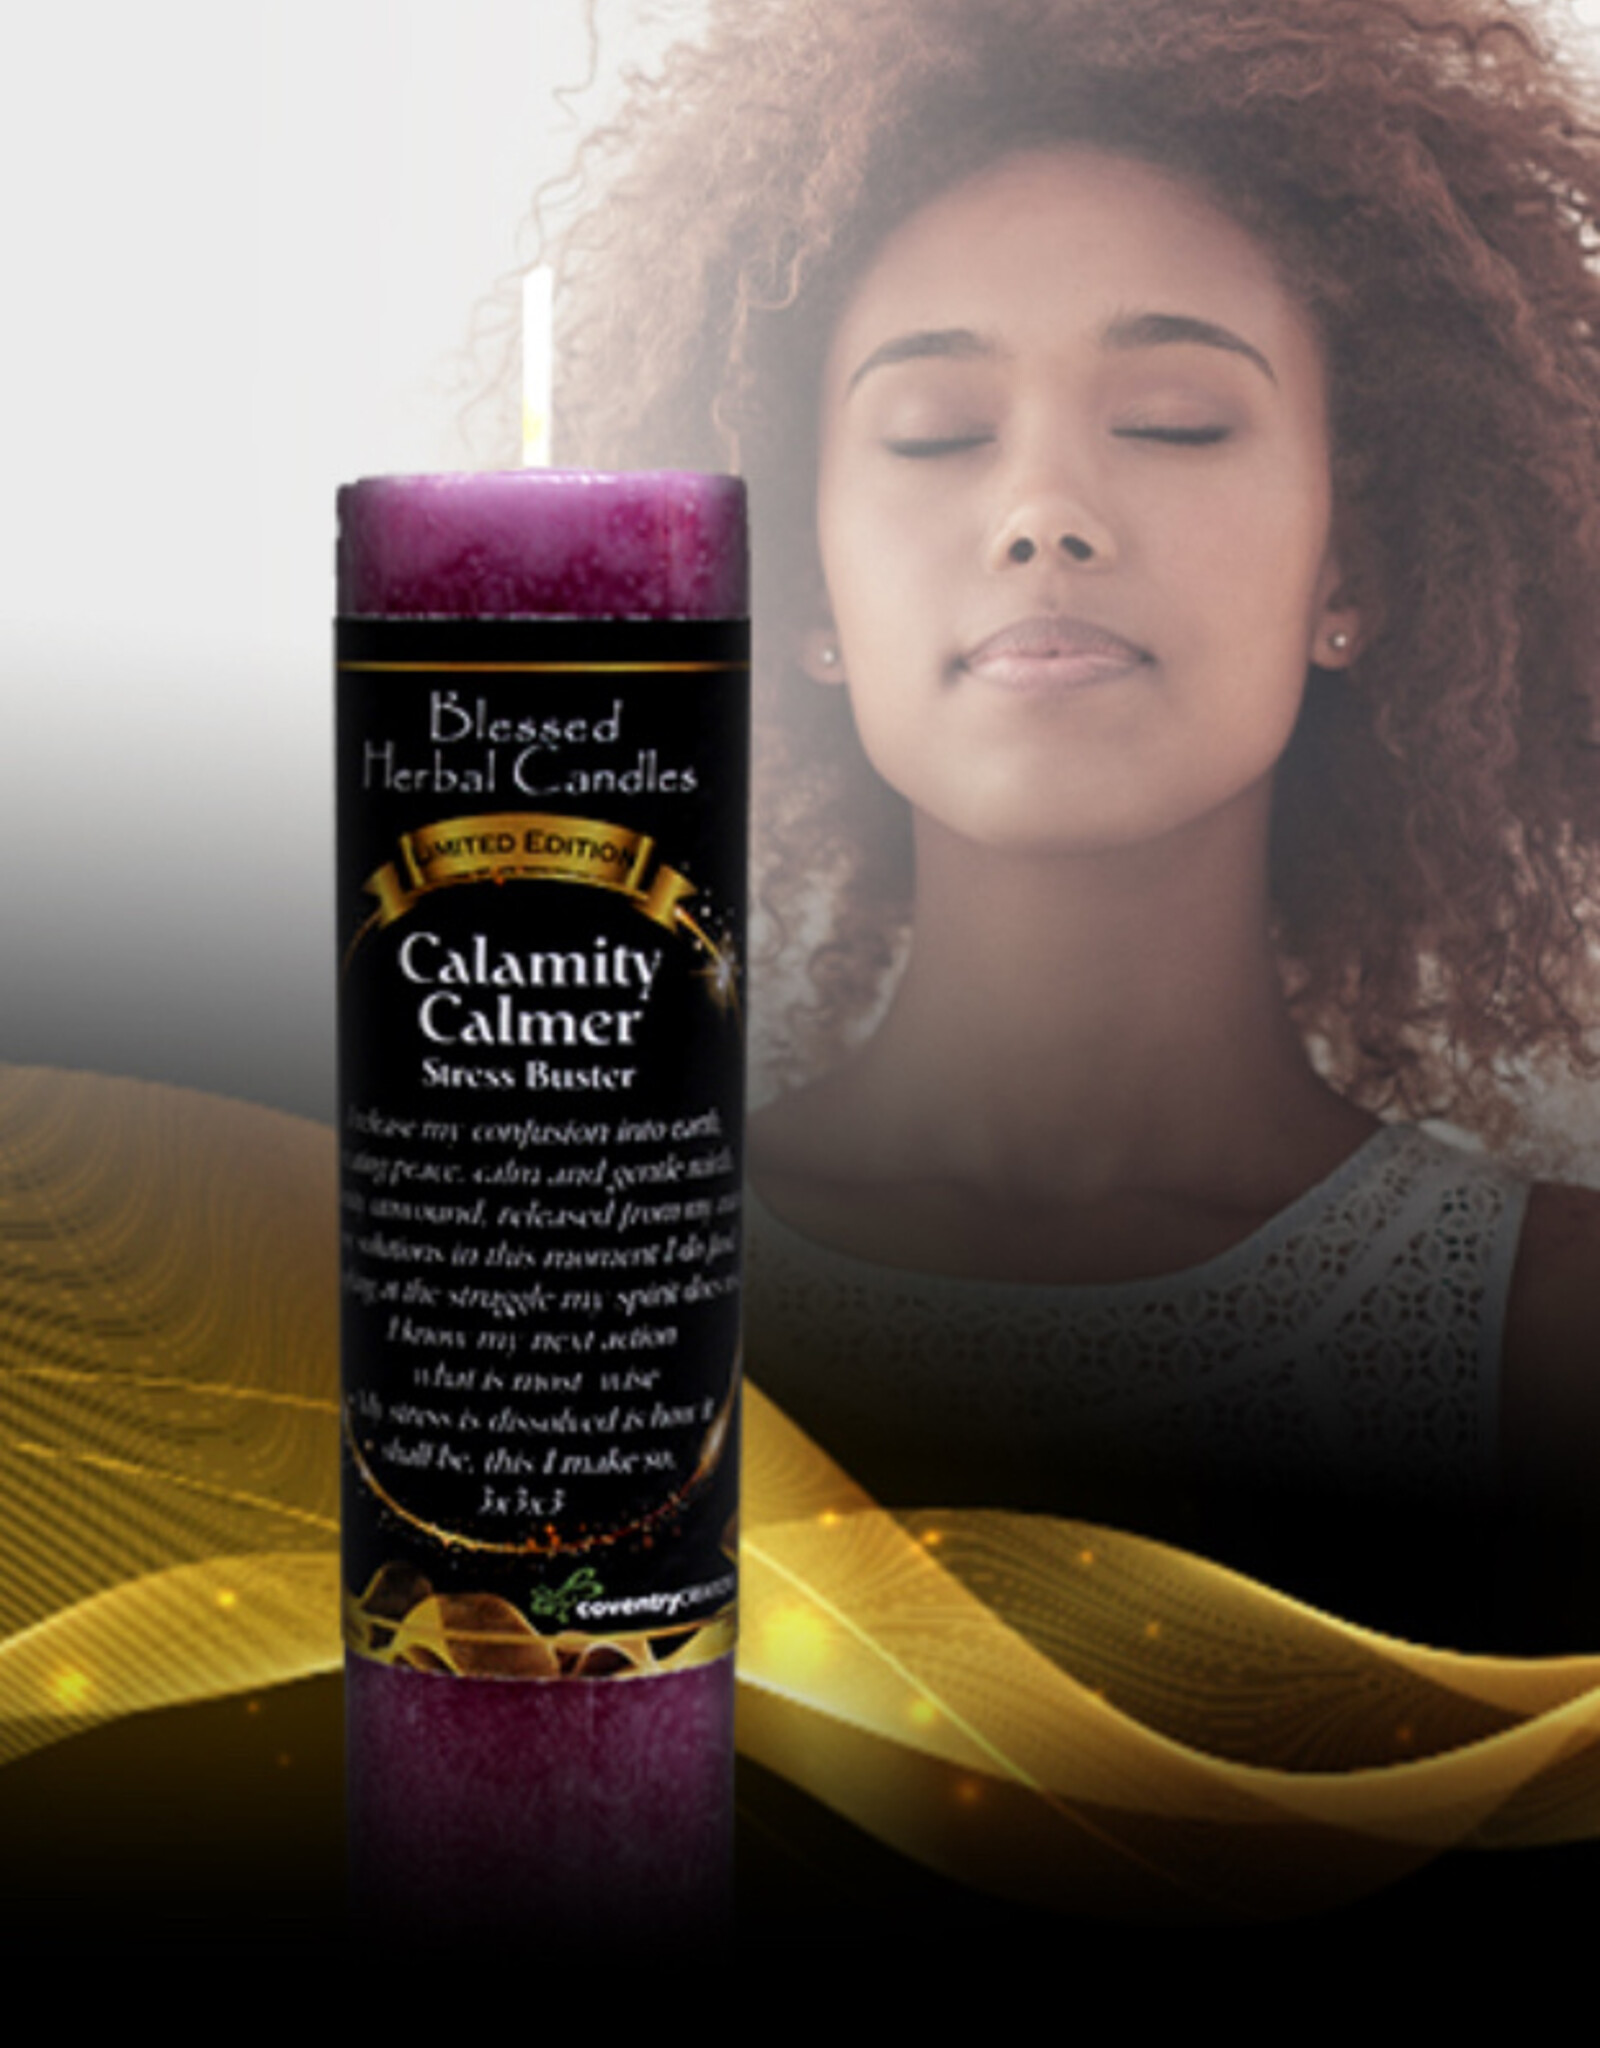 Candle Blessed Herbal Calamity Calmer